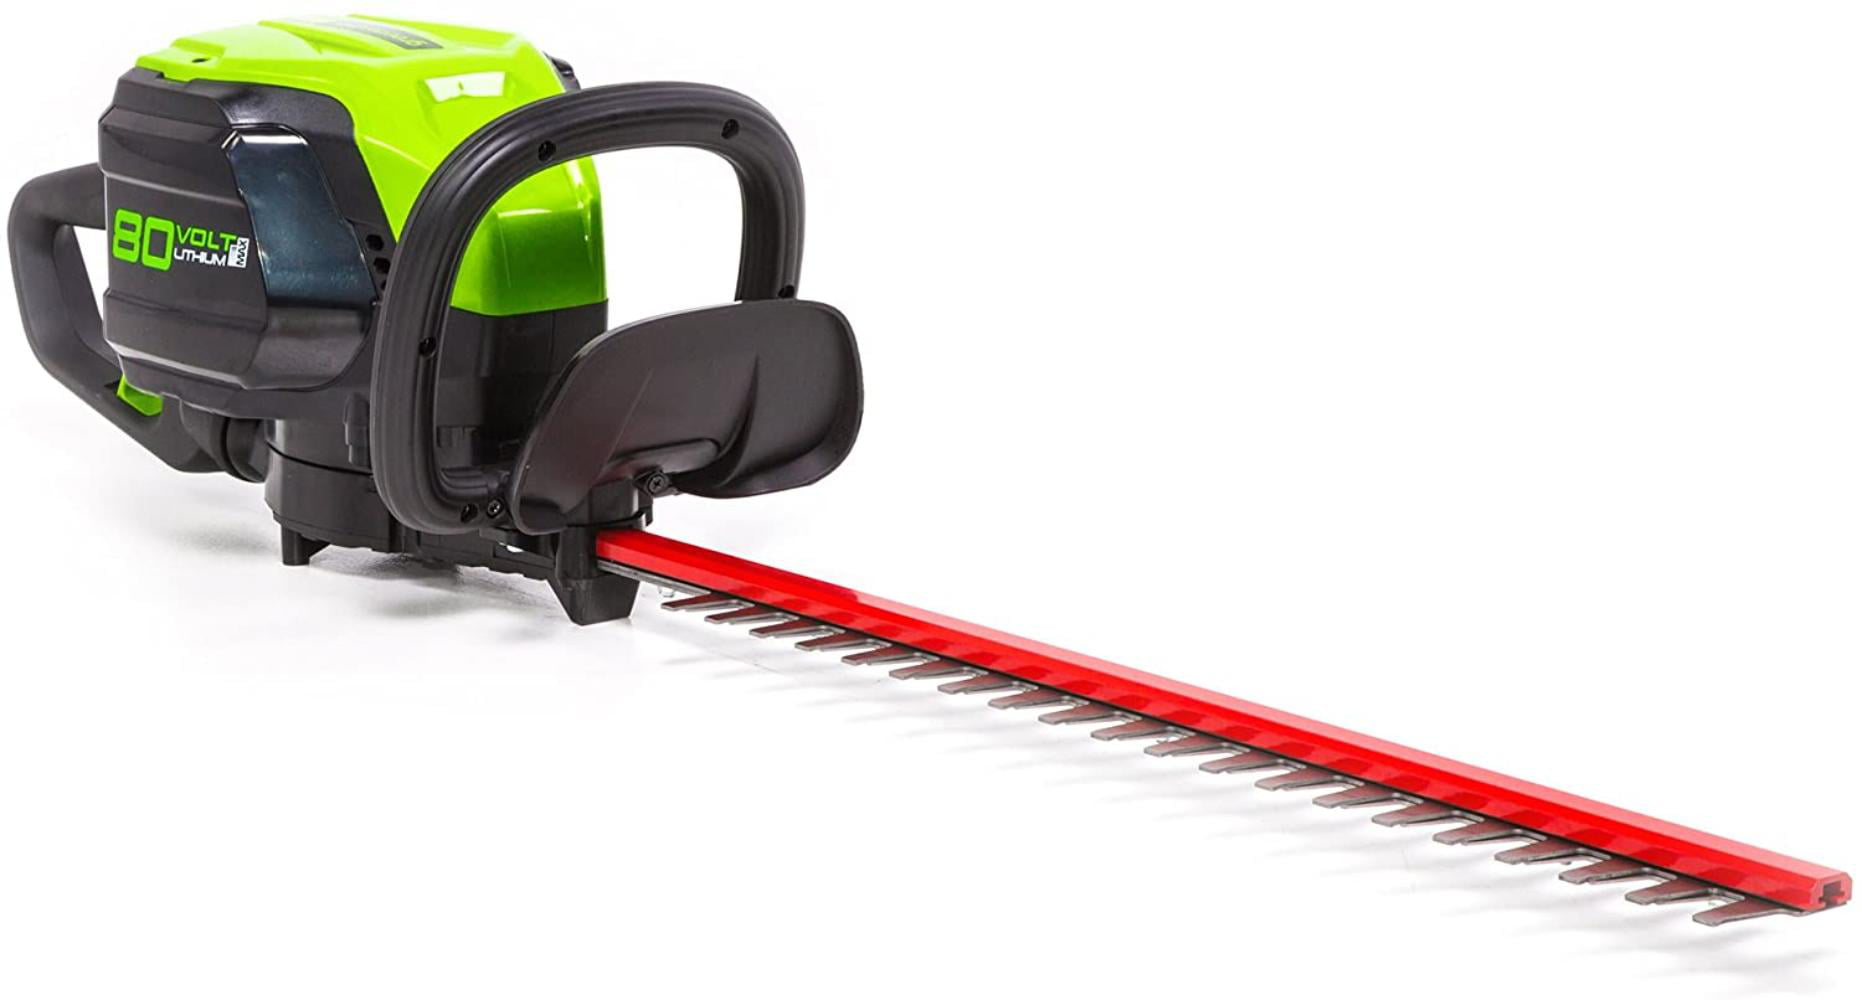 Battery Not Included Greenworks HT80L00 Pro 80V 24-Inch Brushless Hedge Trimmer 24 inches Black and Green 